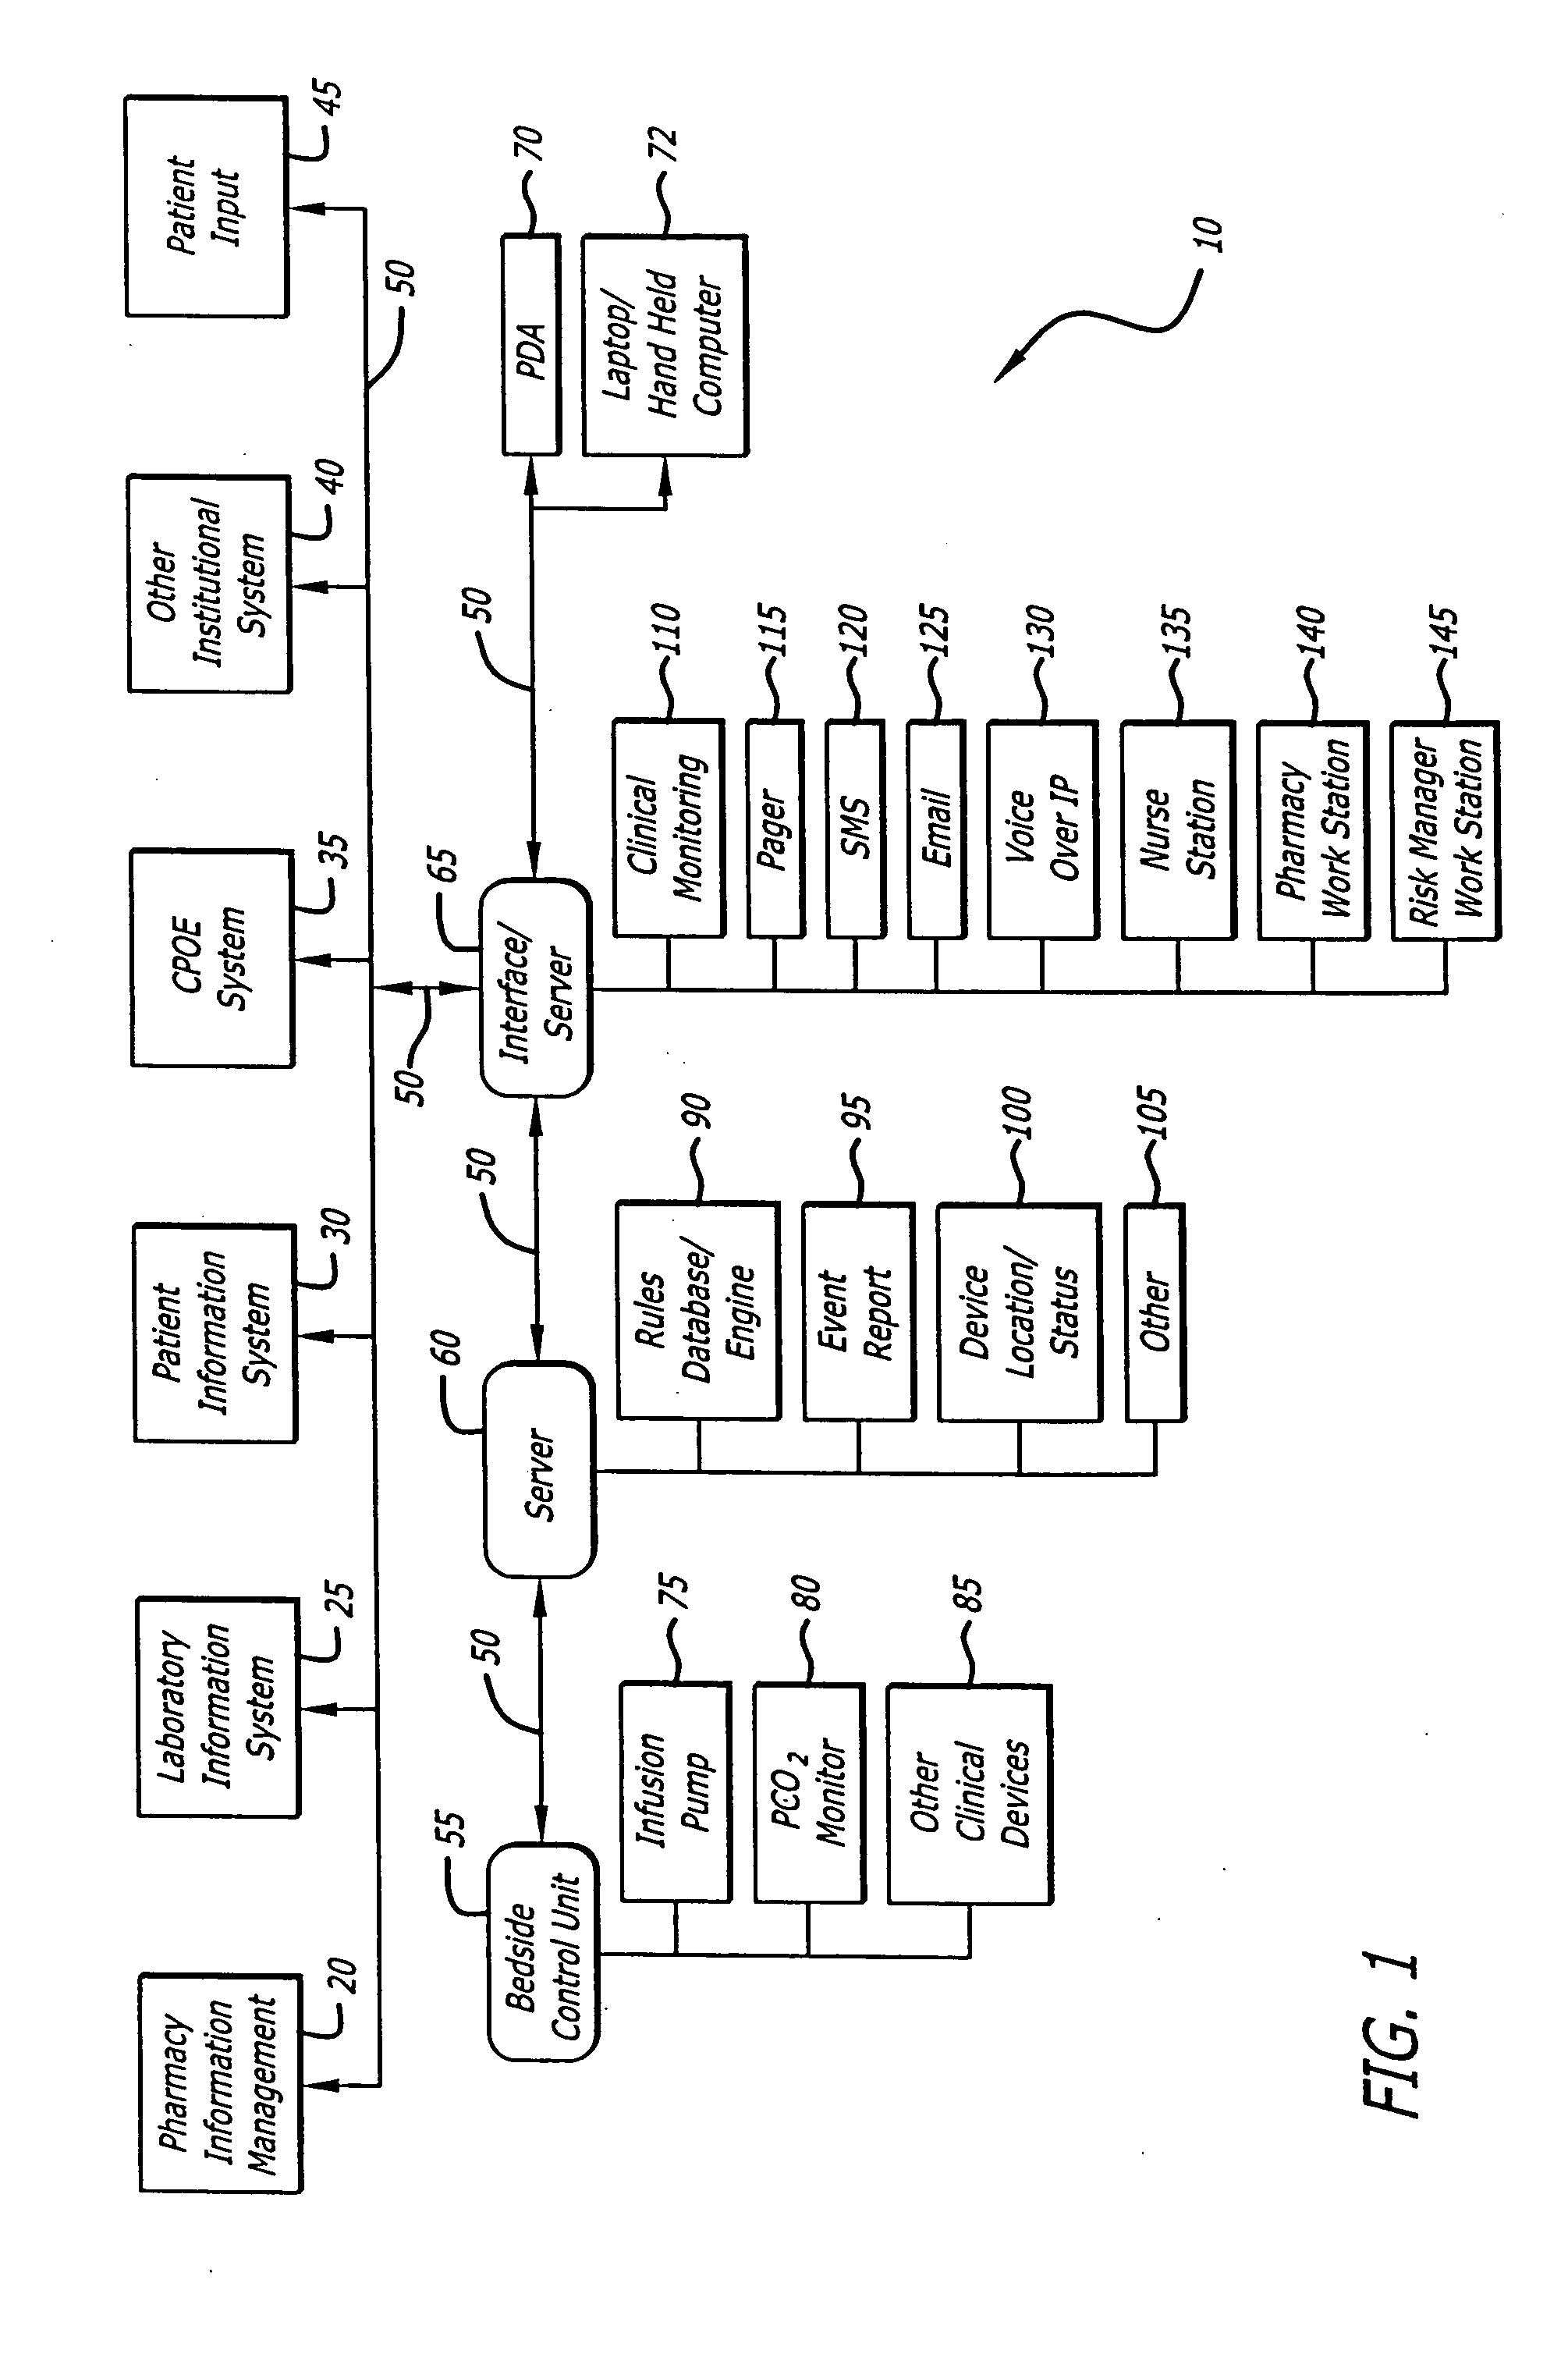 System and method for dynamic determination of disease prognosis